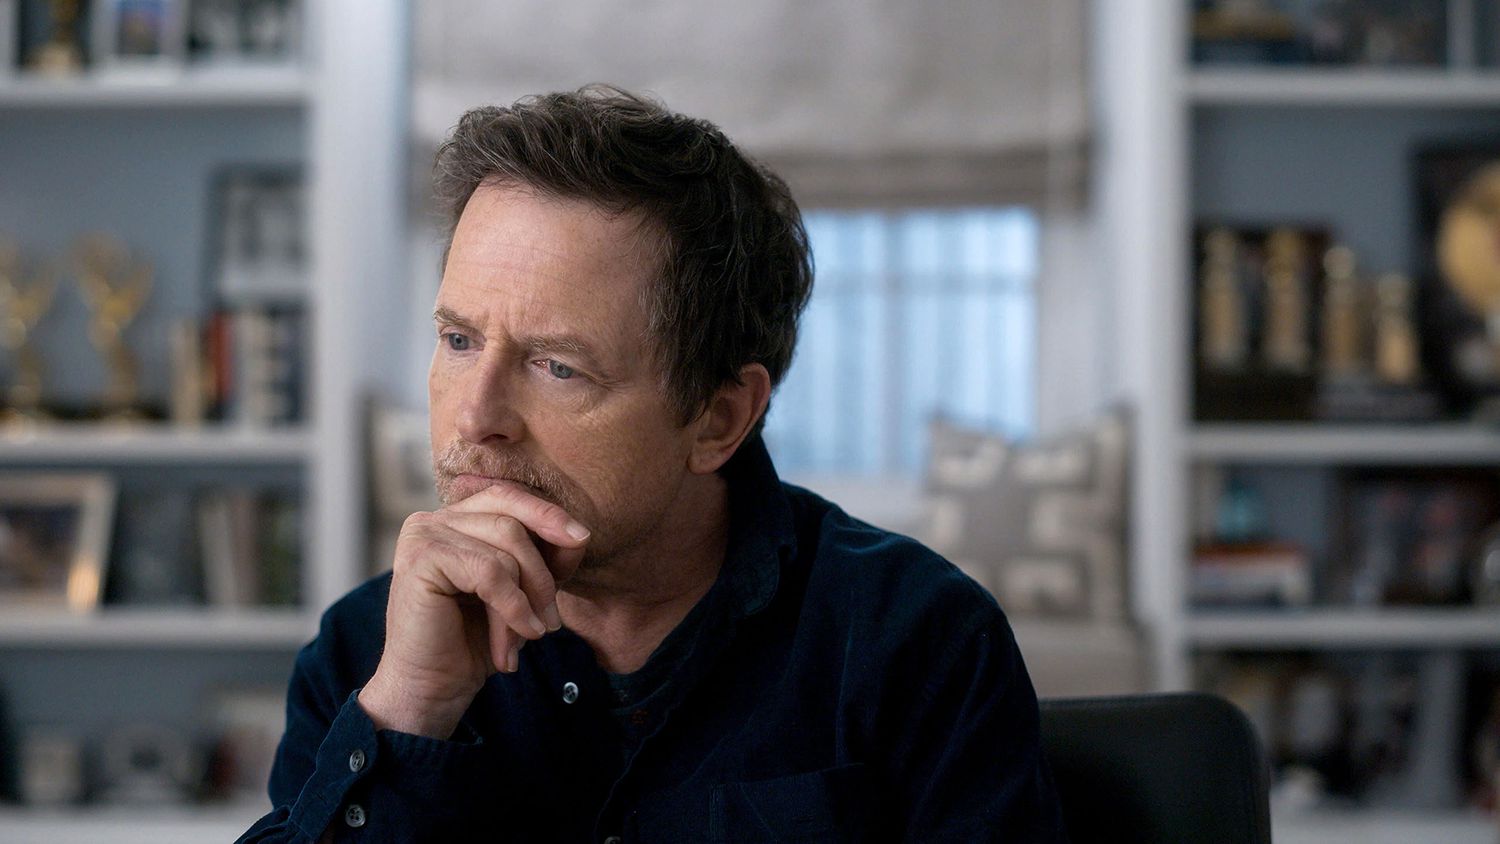 Still: A Michael J. Fox Movie: Everything we learned from the new documentary - Entertainment Weekly News